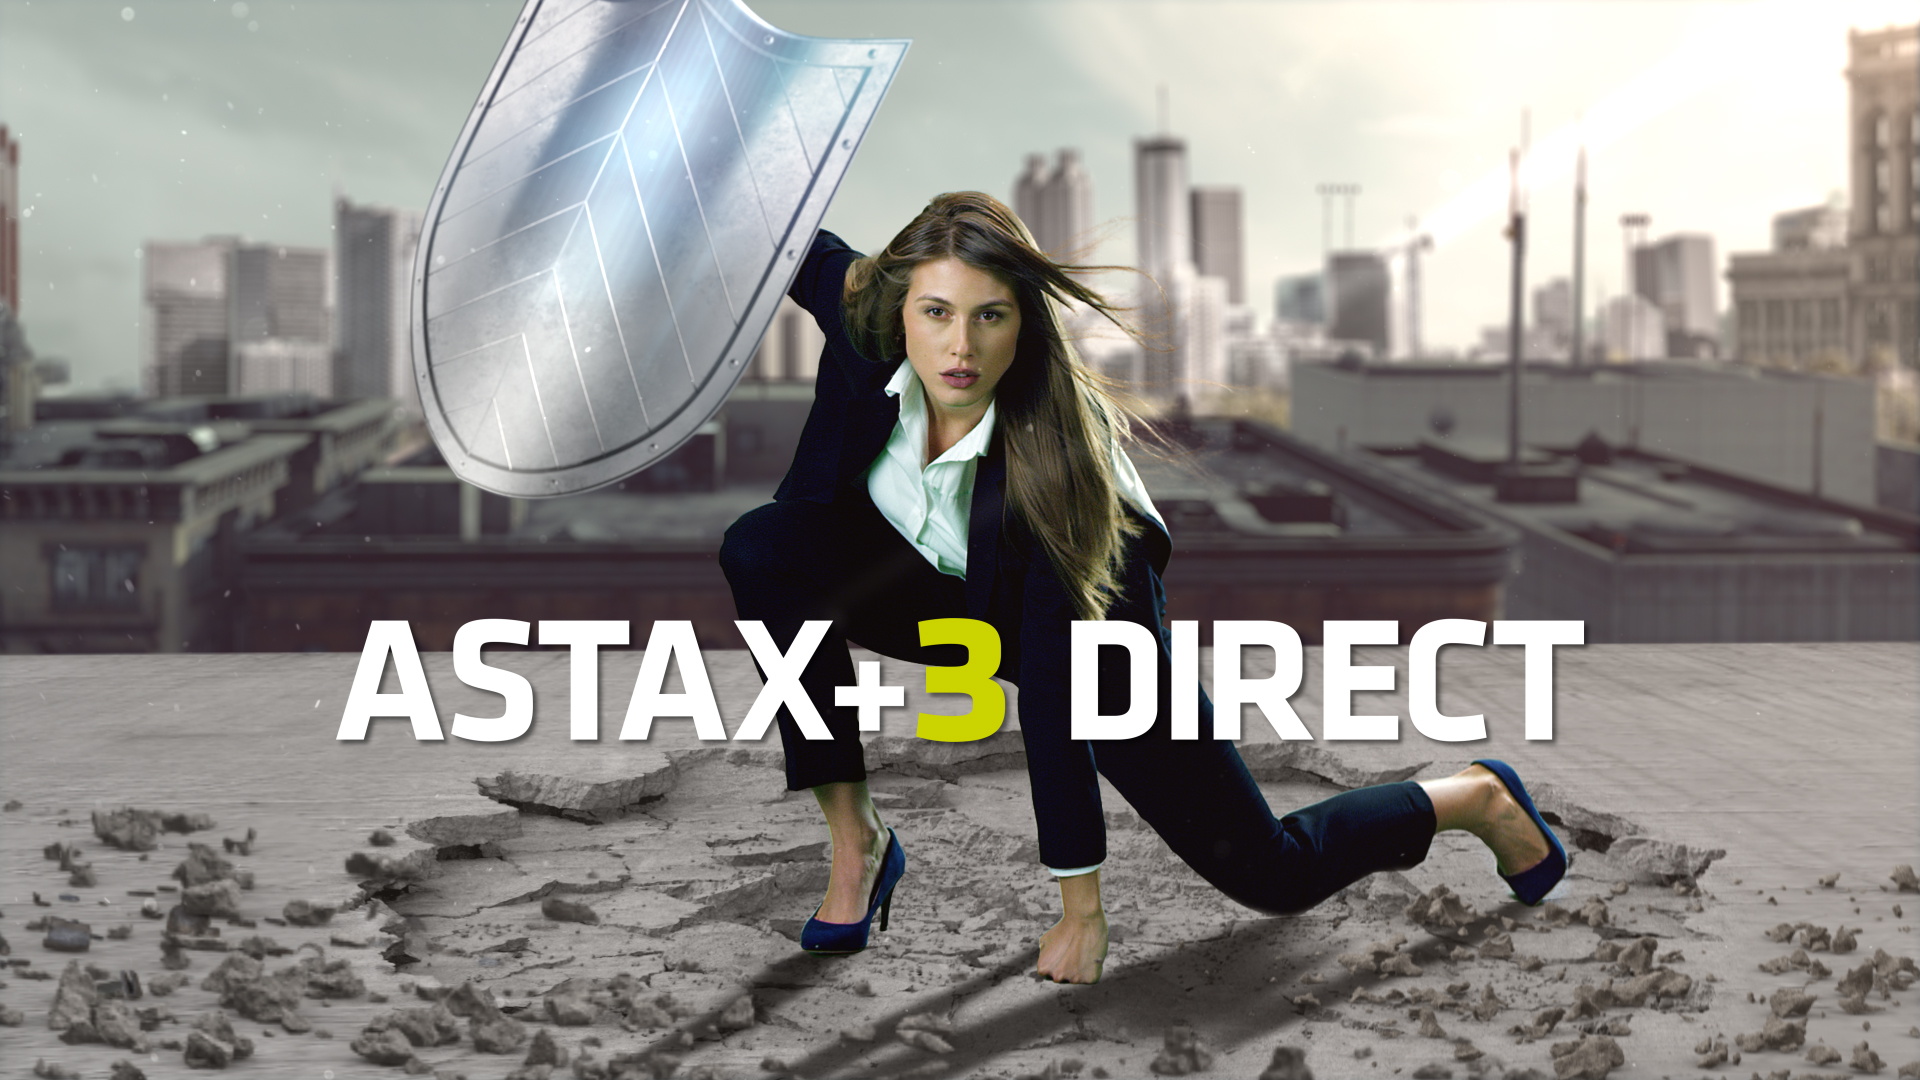 TVC ASTAX +3 Direct